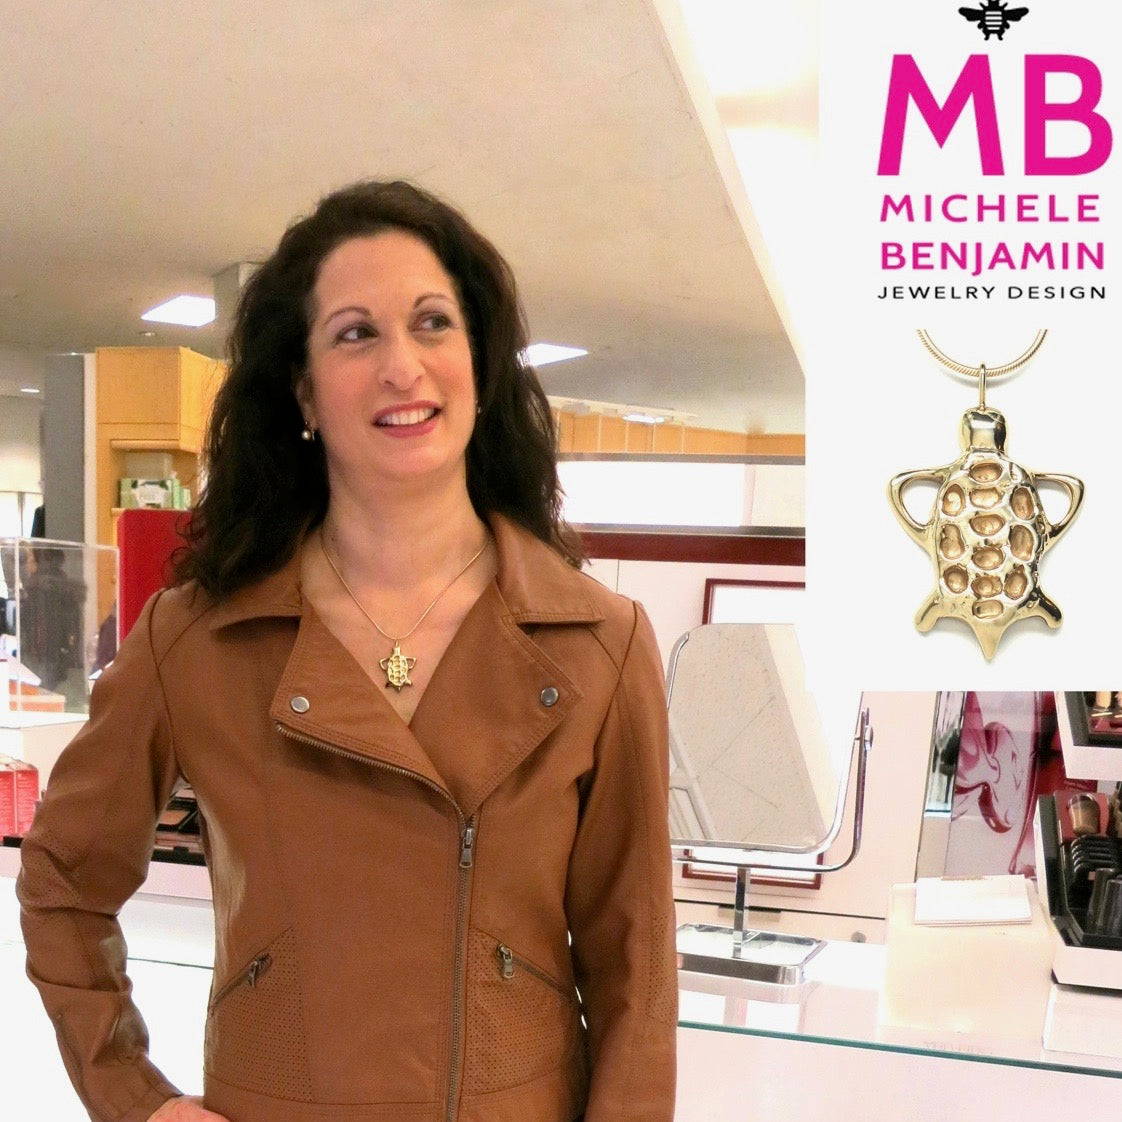 Tortoise Collection Jewelry by Michele Benjamin in a variety of finishes including charms, pins, and pendant necklaces.